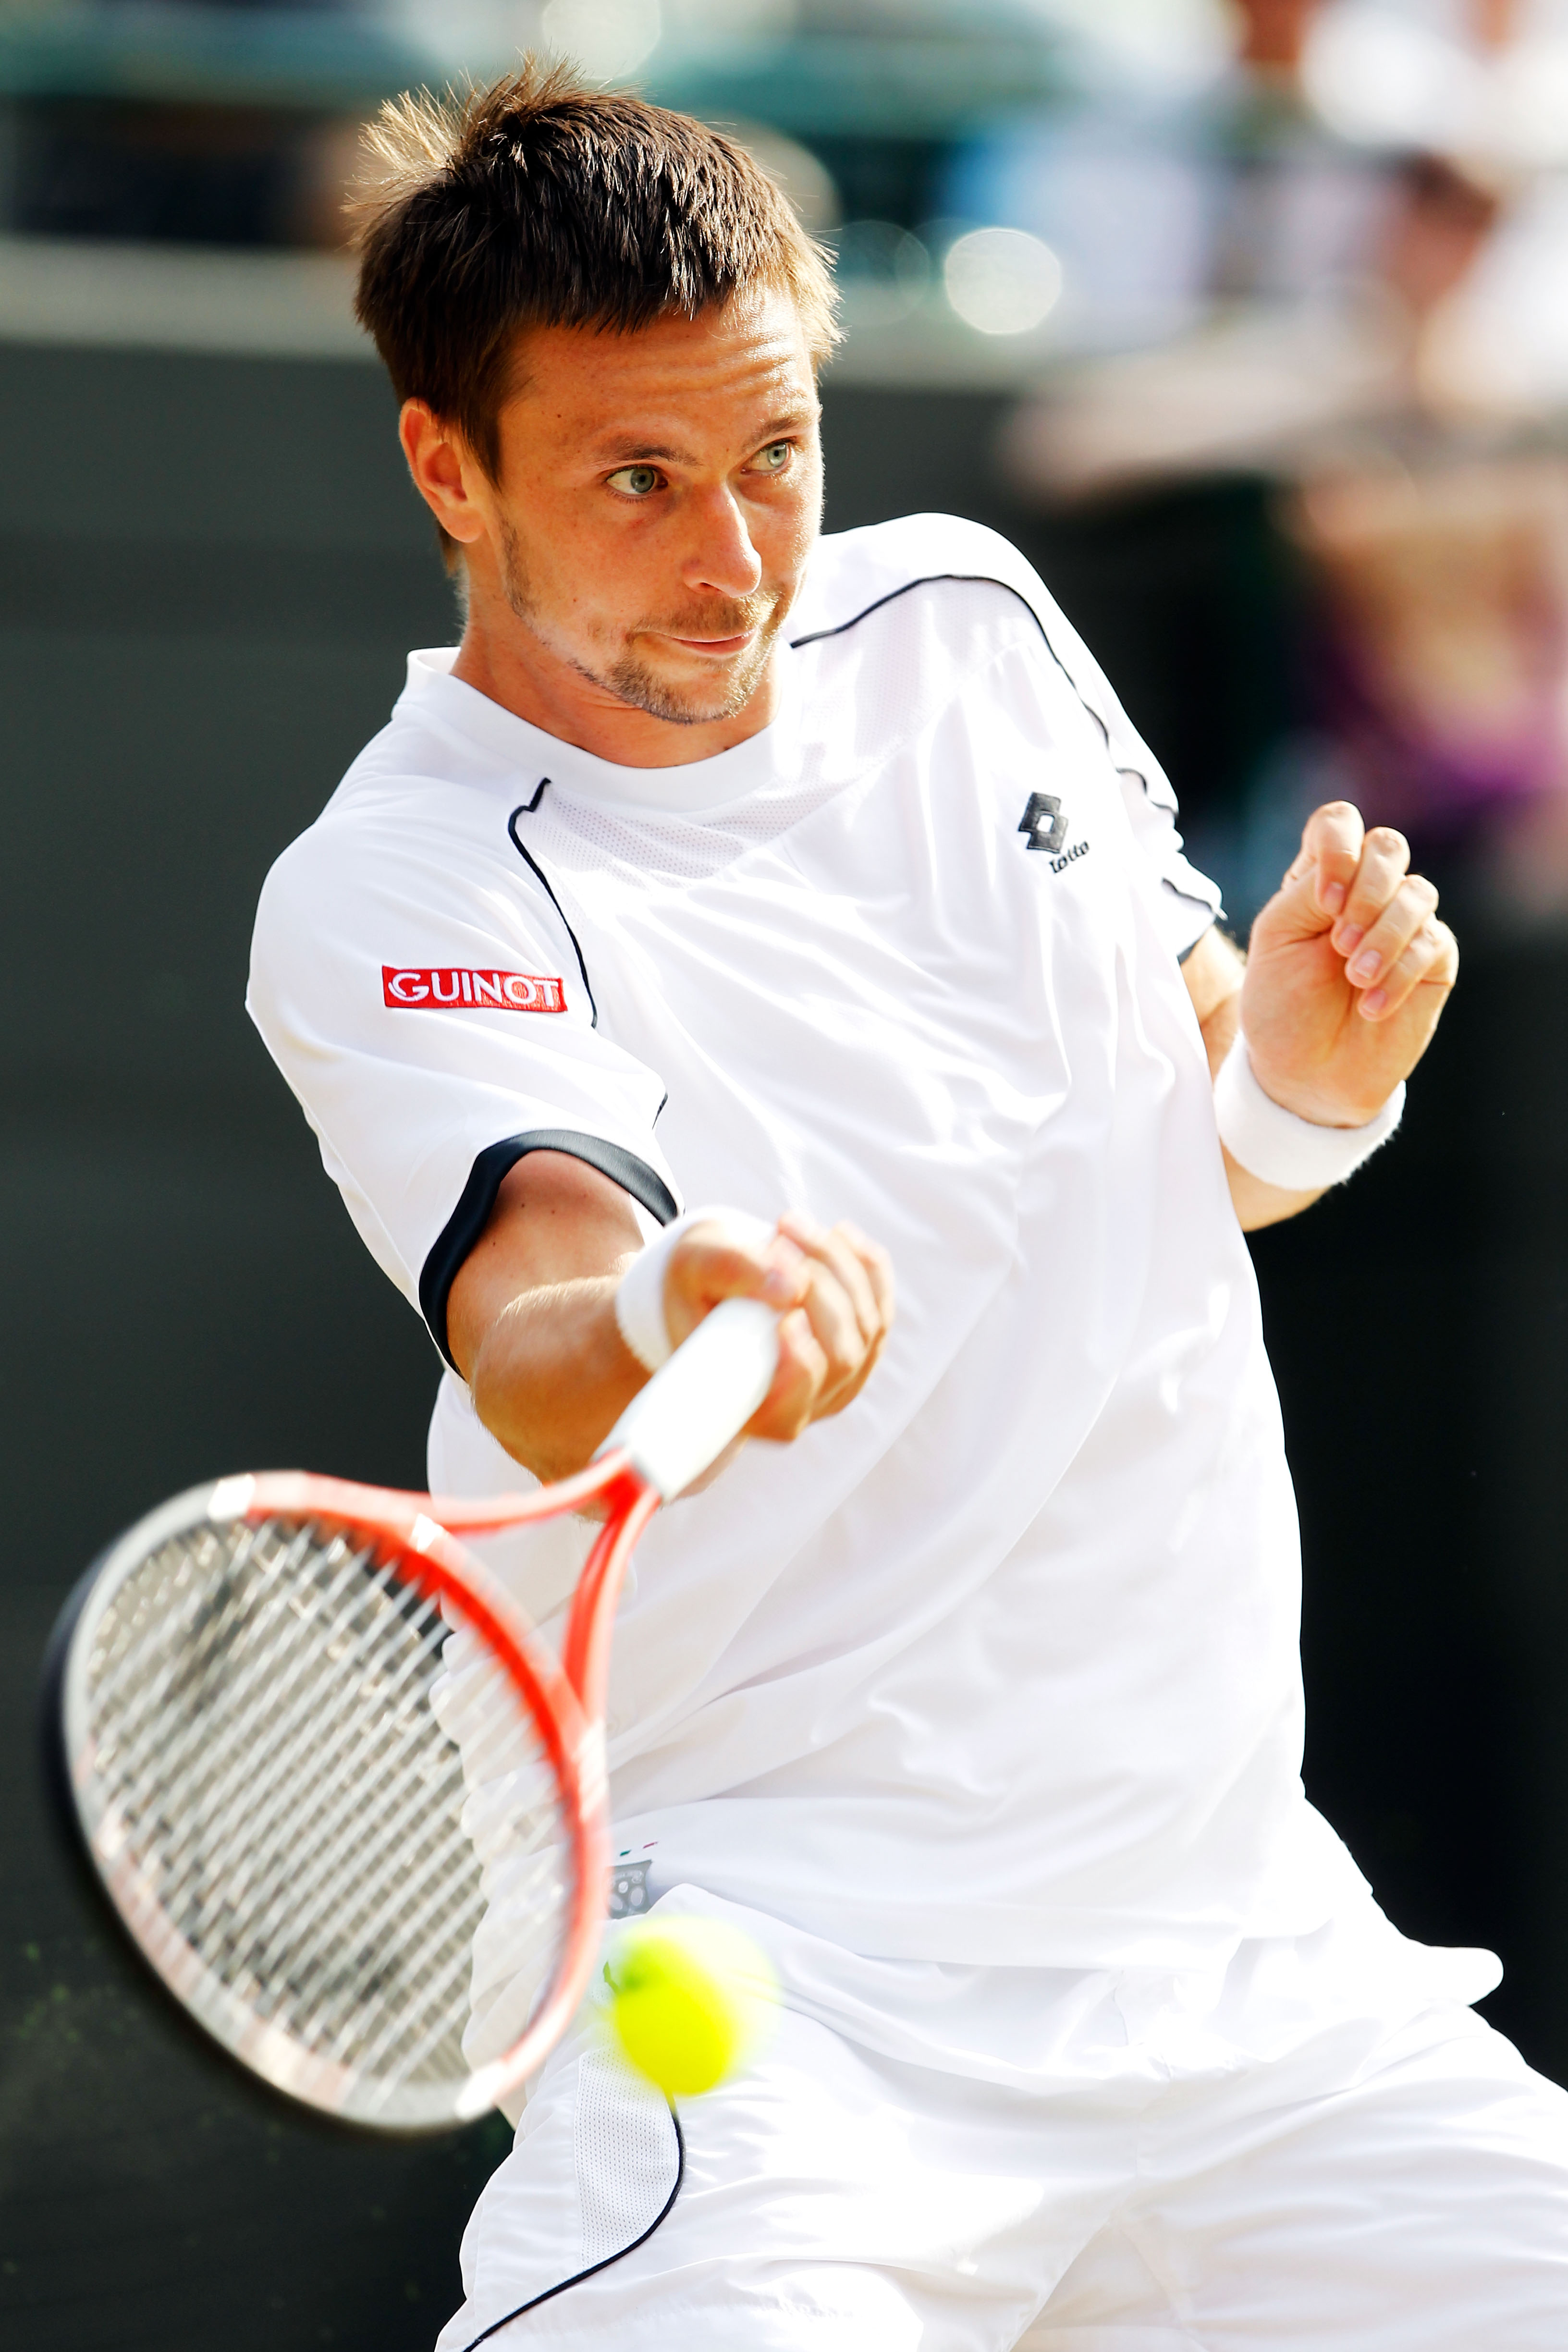 LONDON, ENGLAND - JUNE 30:  Robin Soderling of Sweden plays a shot during his Quarter Final match against Rafael Nadal of Spain on Day Nine of the Wimbledon Lawn Tennis Championships at the All England Lawn Tennis and Croquet Club on June 30, 2010 in Lond